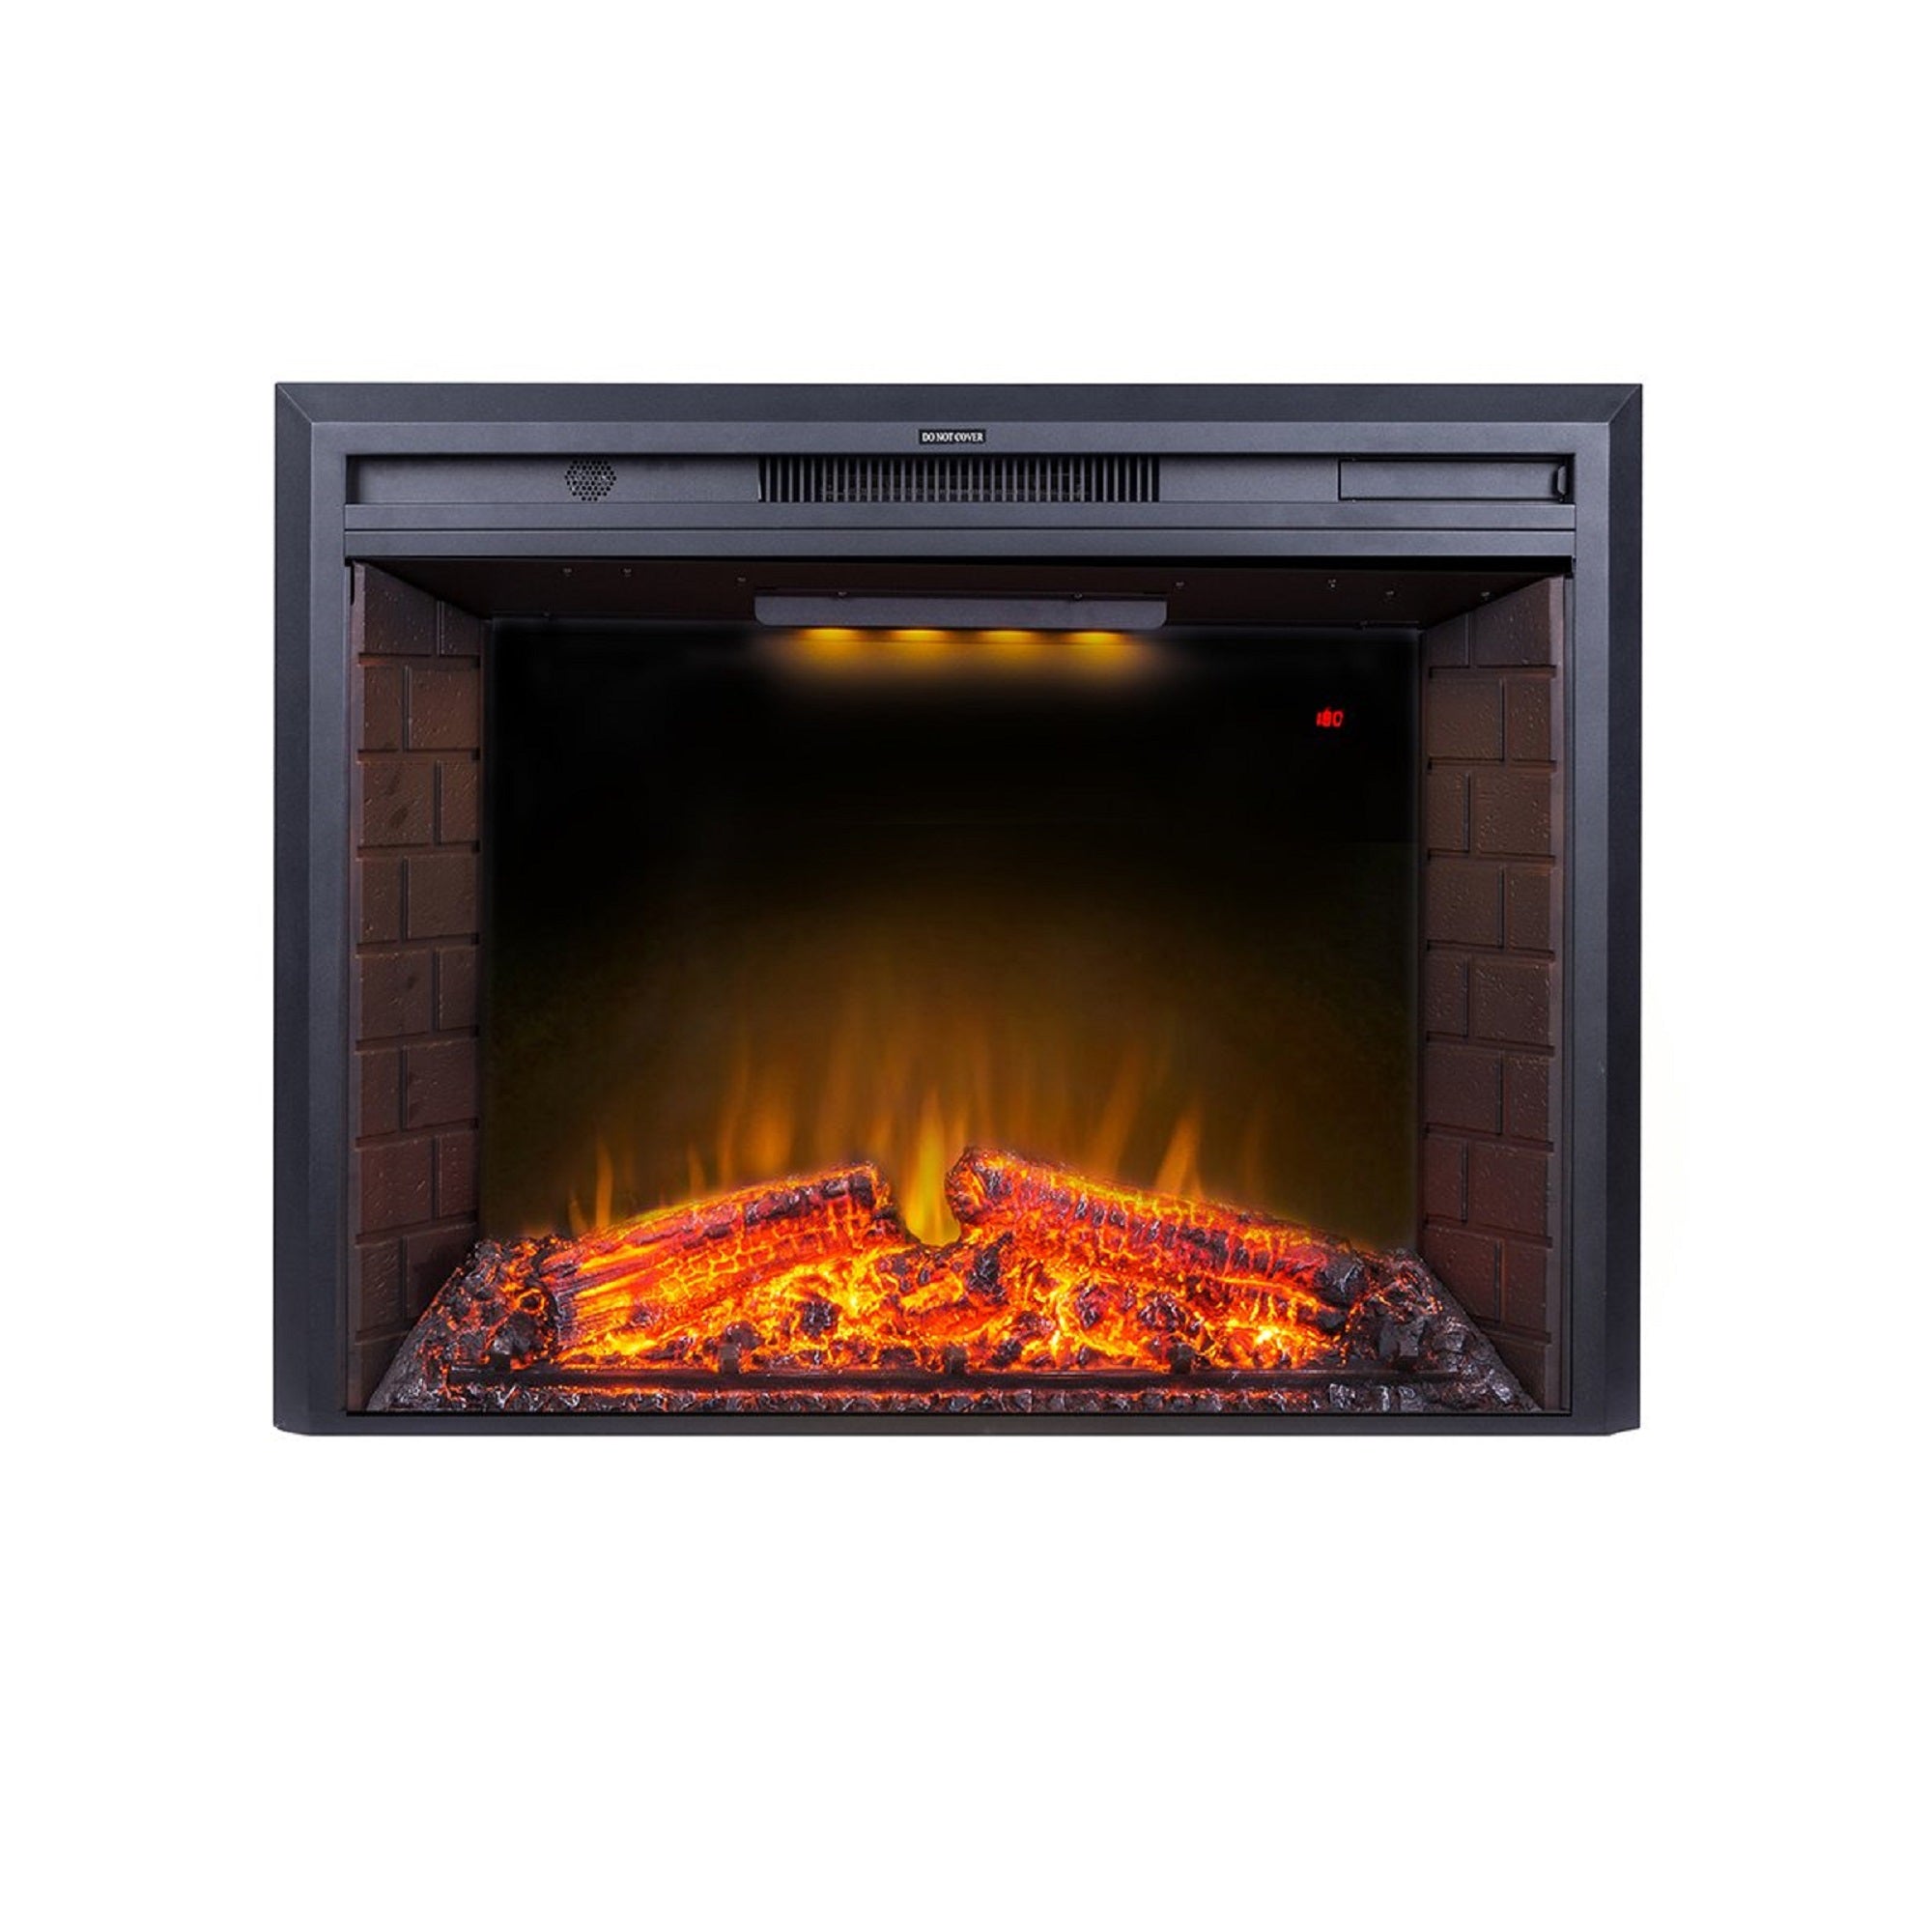 36 Inches Electric Fireplace Insert, Fireplace Heater with Overheating